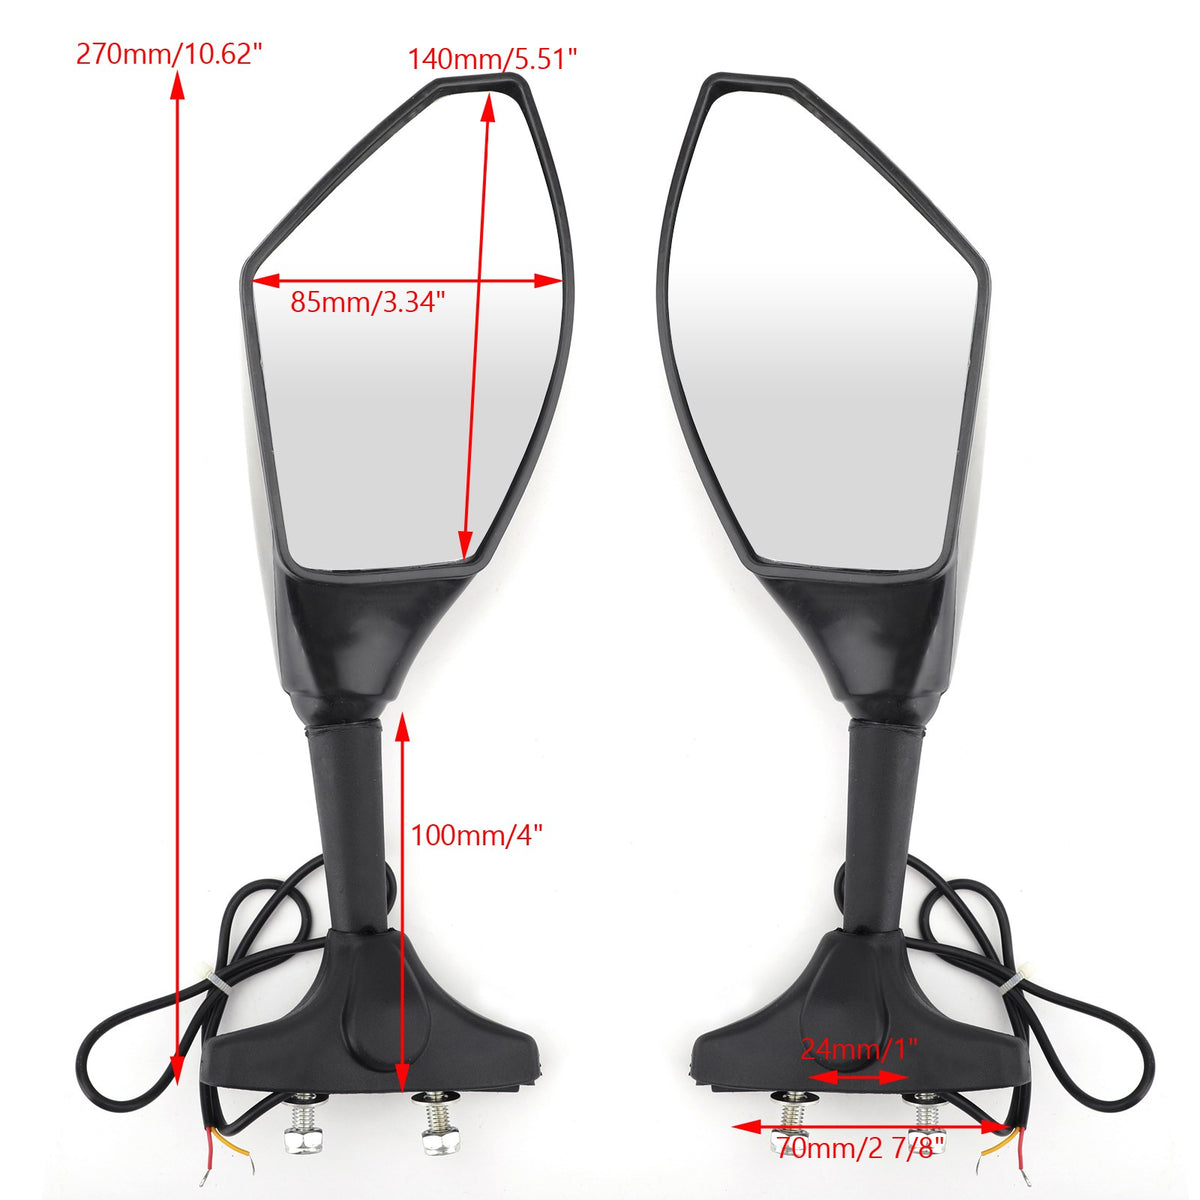 Pair Rear View Side Mirrors With LED Turn Signals Fit For Honda CBR600F4i 2001-2006 CBR600F4 1999-2000 CBR600F 1987-1990 CBR250R  2011-2013 Generic